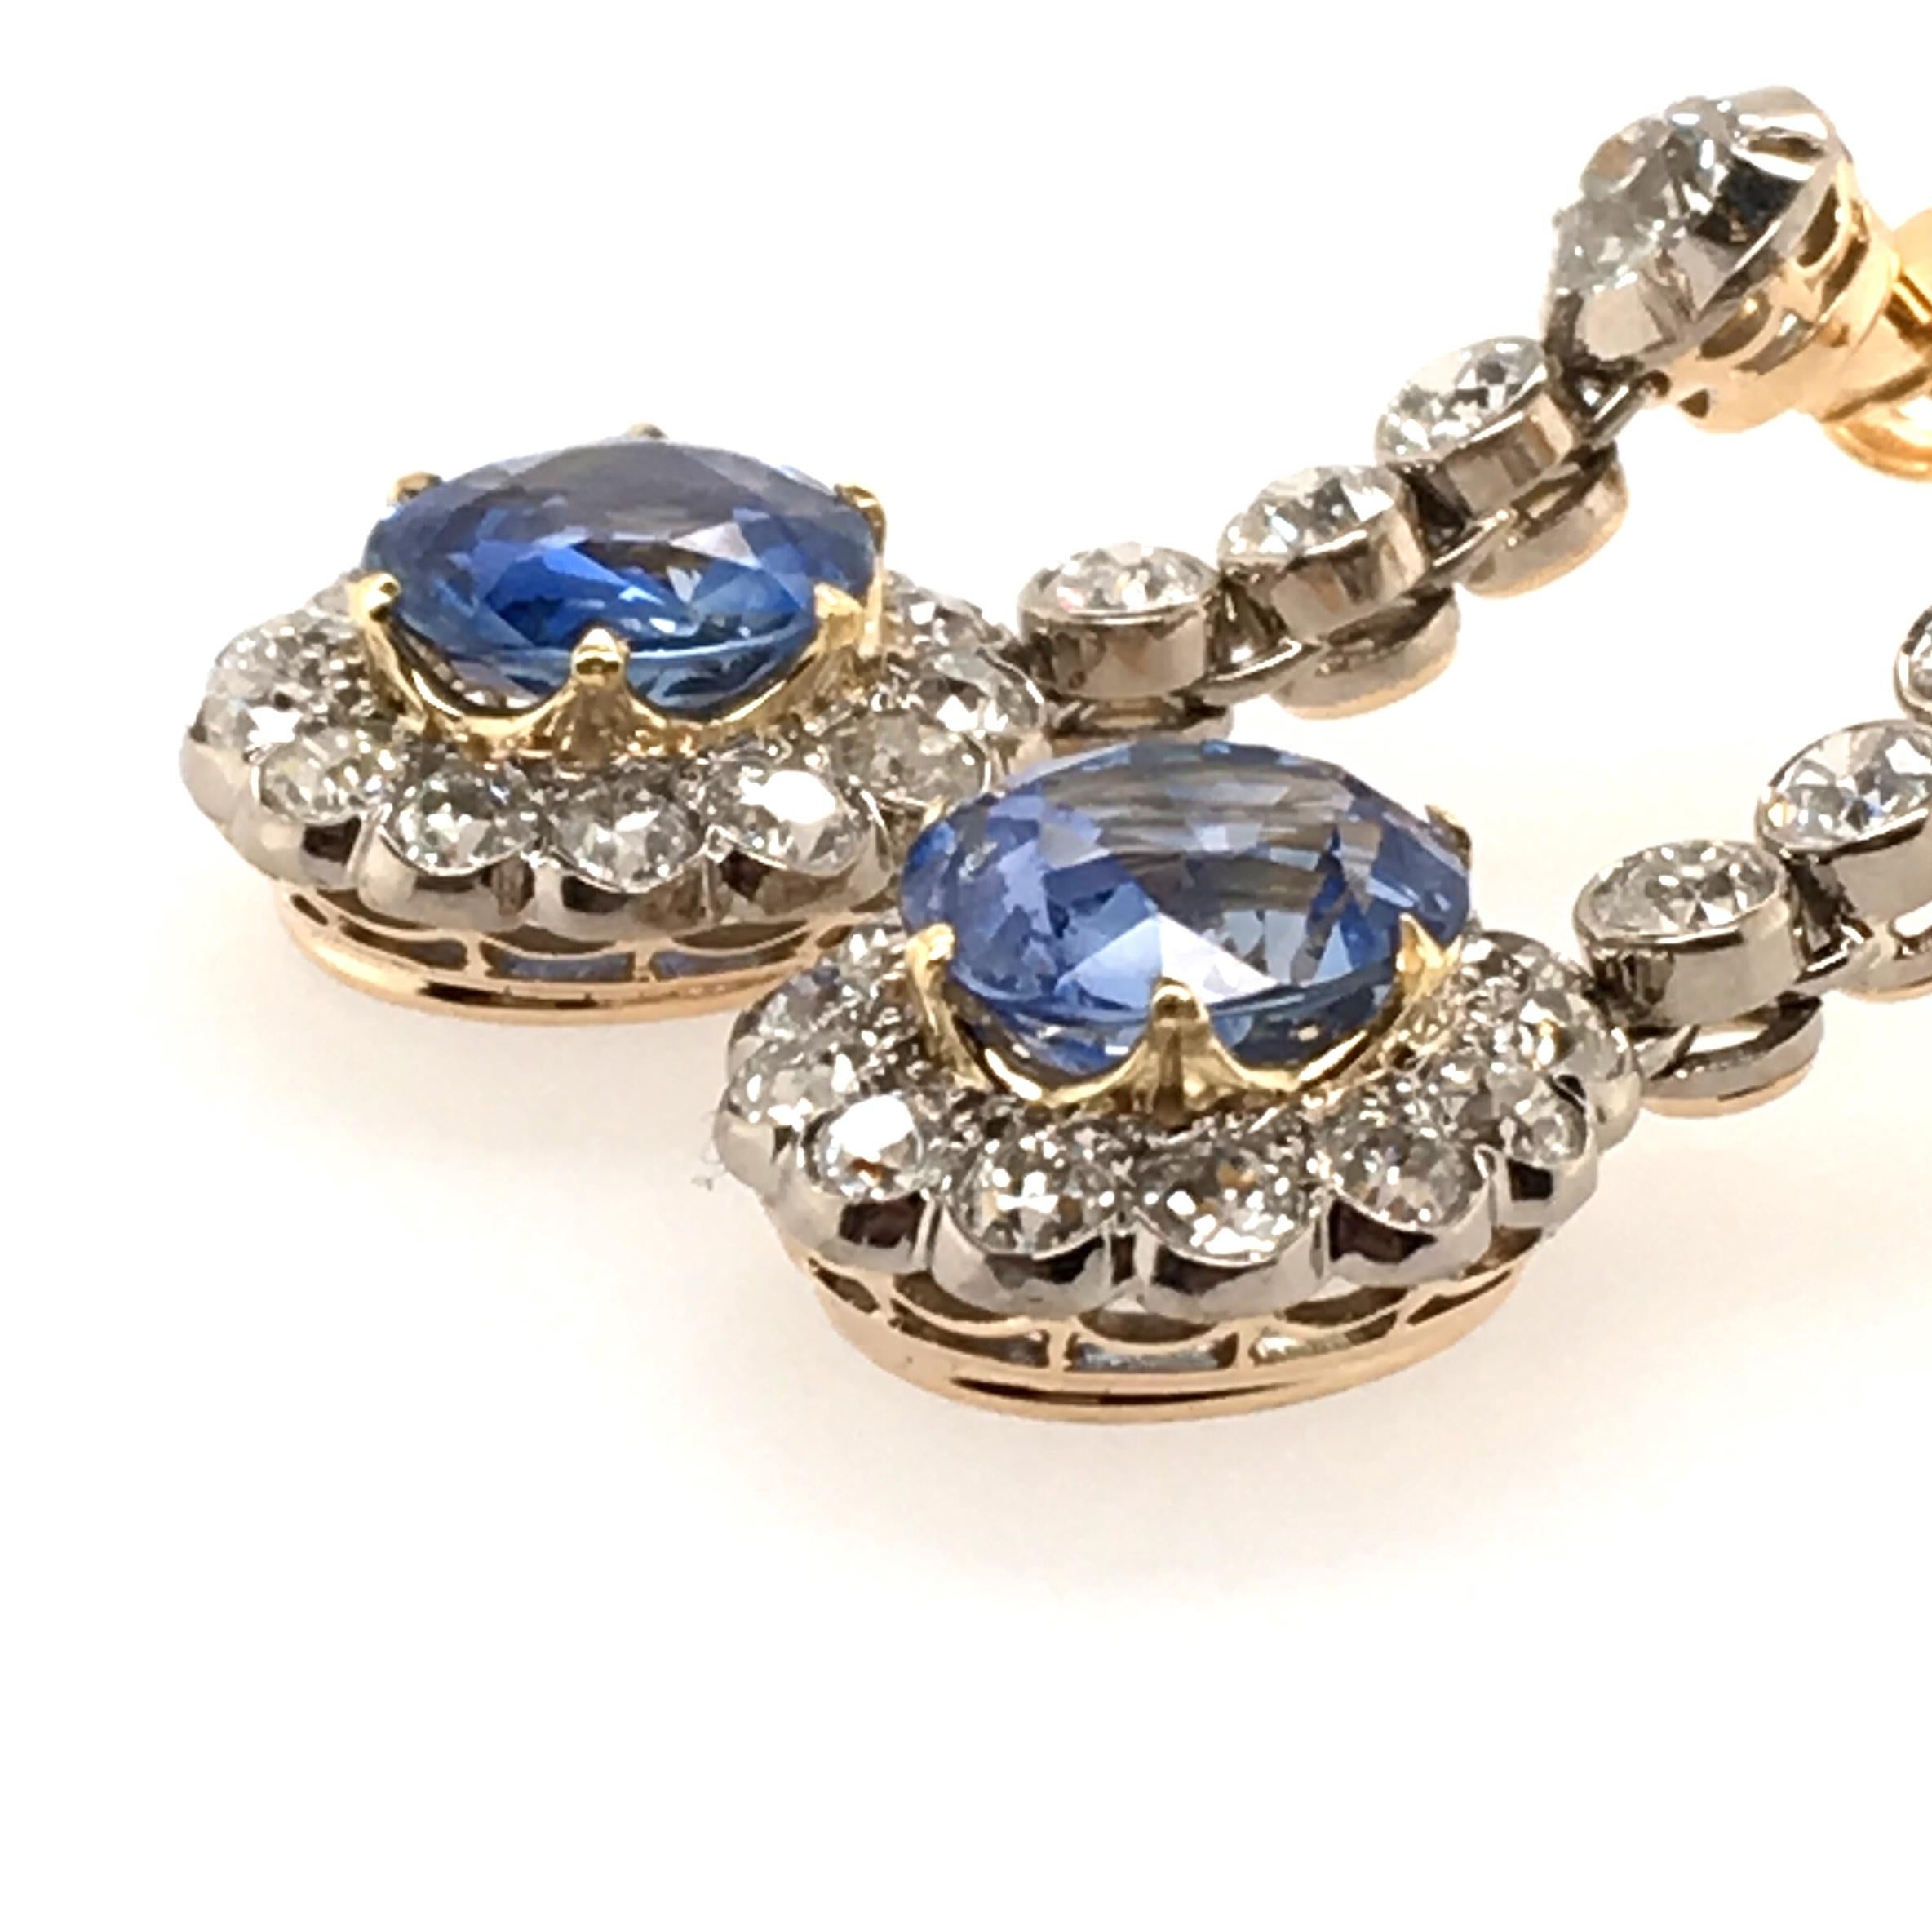 A pair antique 15 karat yellow gold, silver topped, sapphire and diamond earrings. Circa 1910. Each suspending an oval cut sapphire, weighing 5.79 carats total, within an old cut diamond surround, from an articulated line of old cut diamonds. Thirty